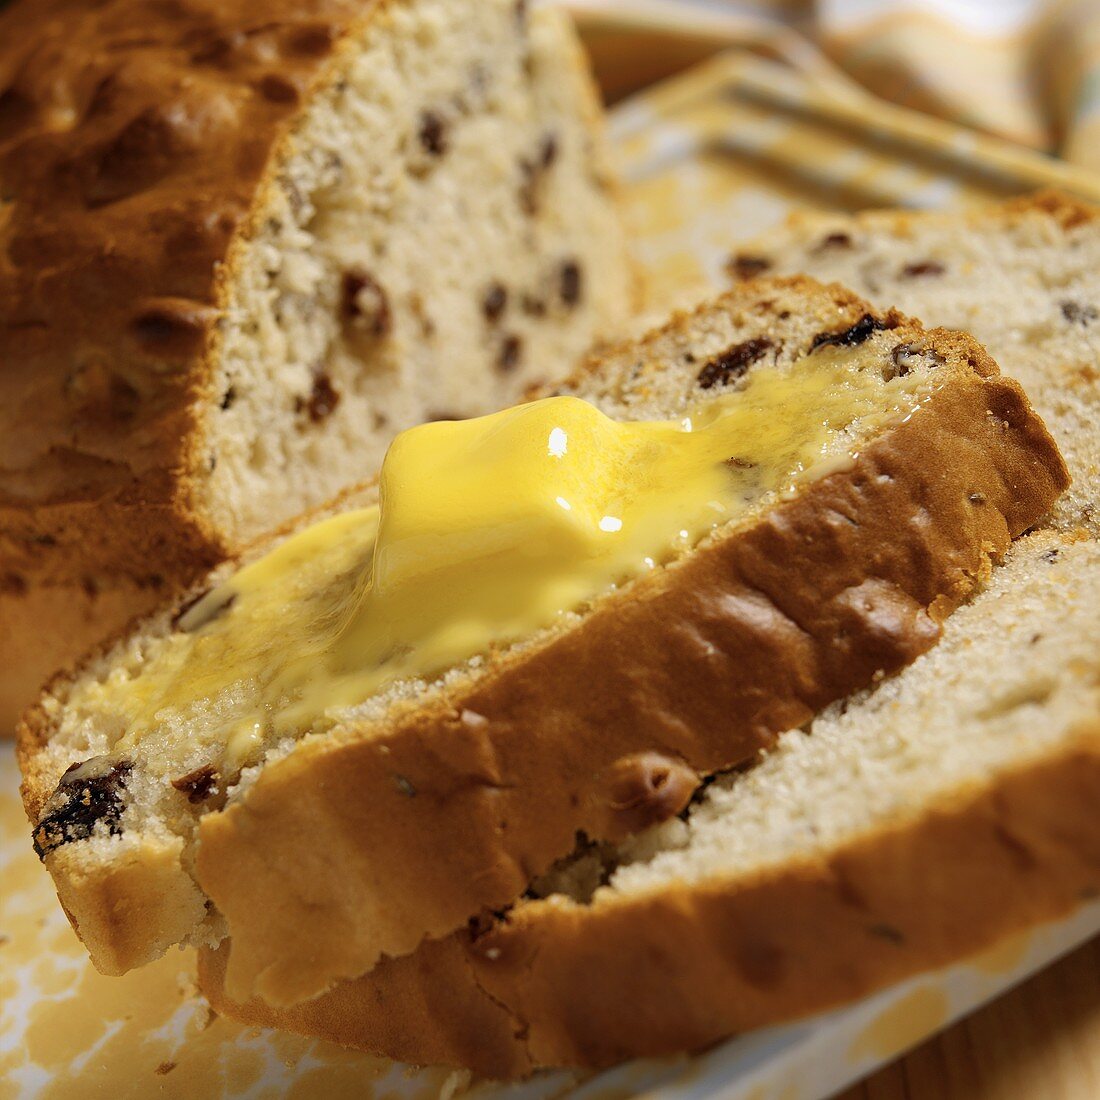 A Slice of Warm Raisin Soda Bread with Melting Butter